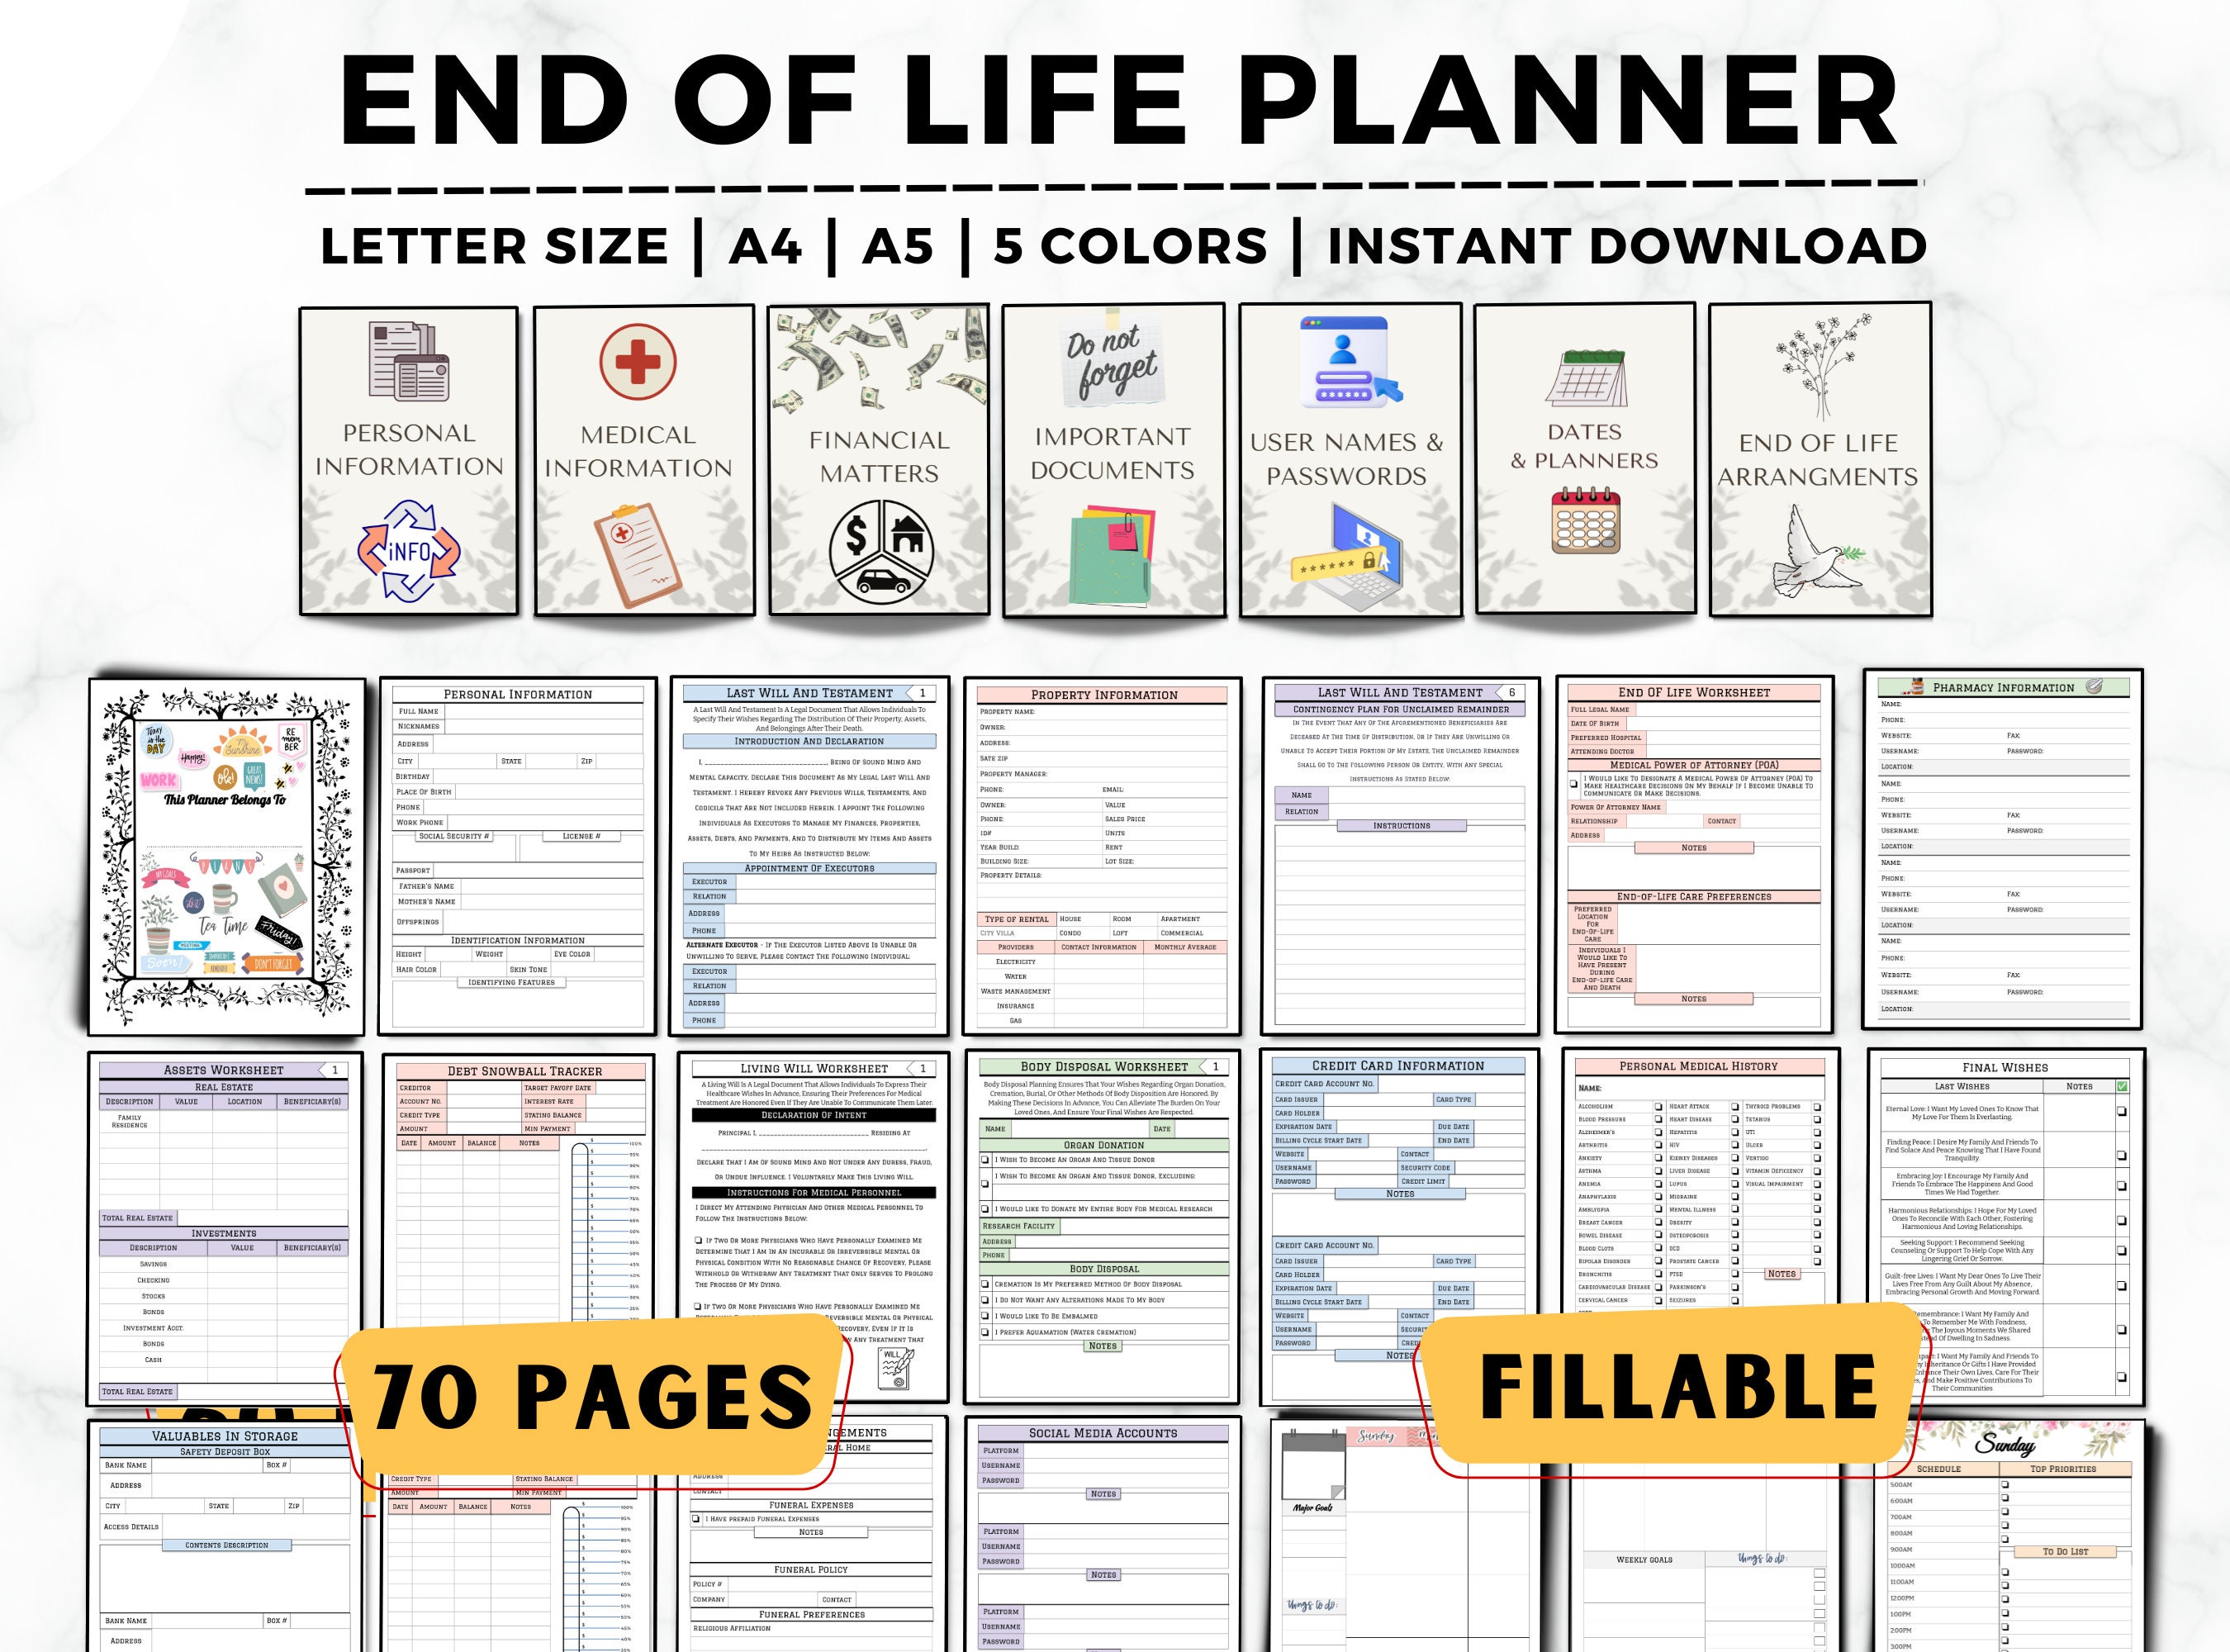 Stream {DOWNLOAD} ⚡ When I die Planner: Death planner organizer for those  you leave behind, End of life b by Mackertgrea